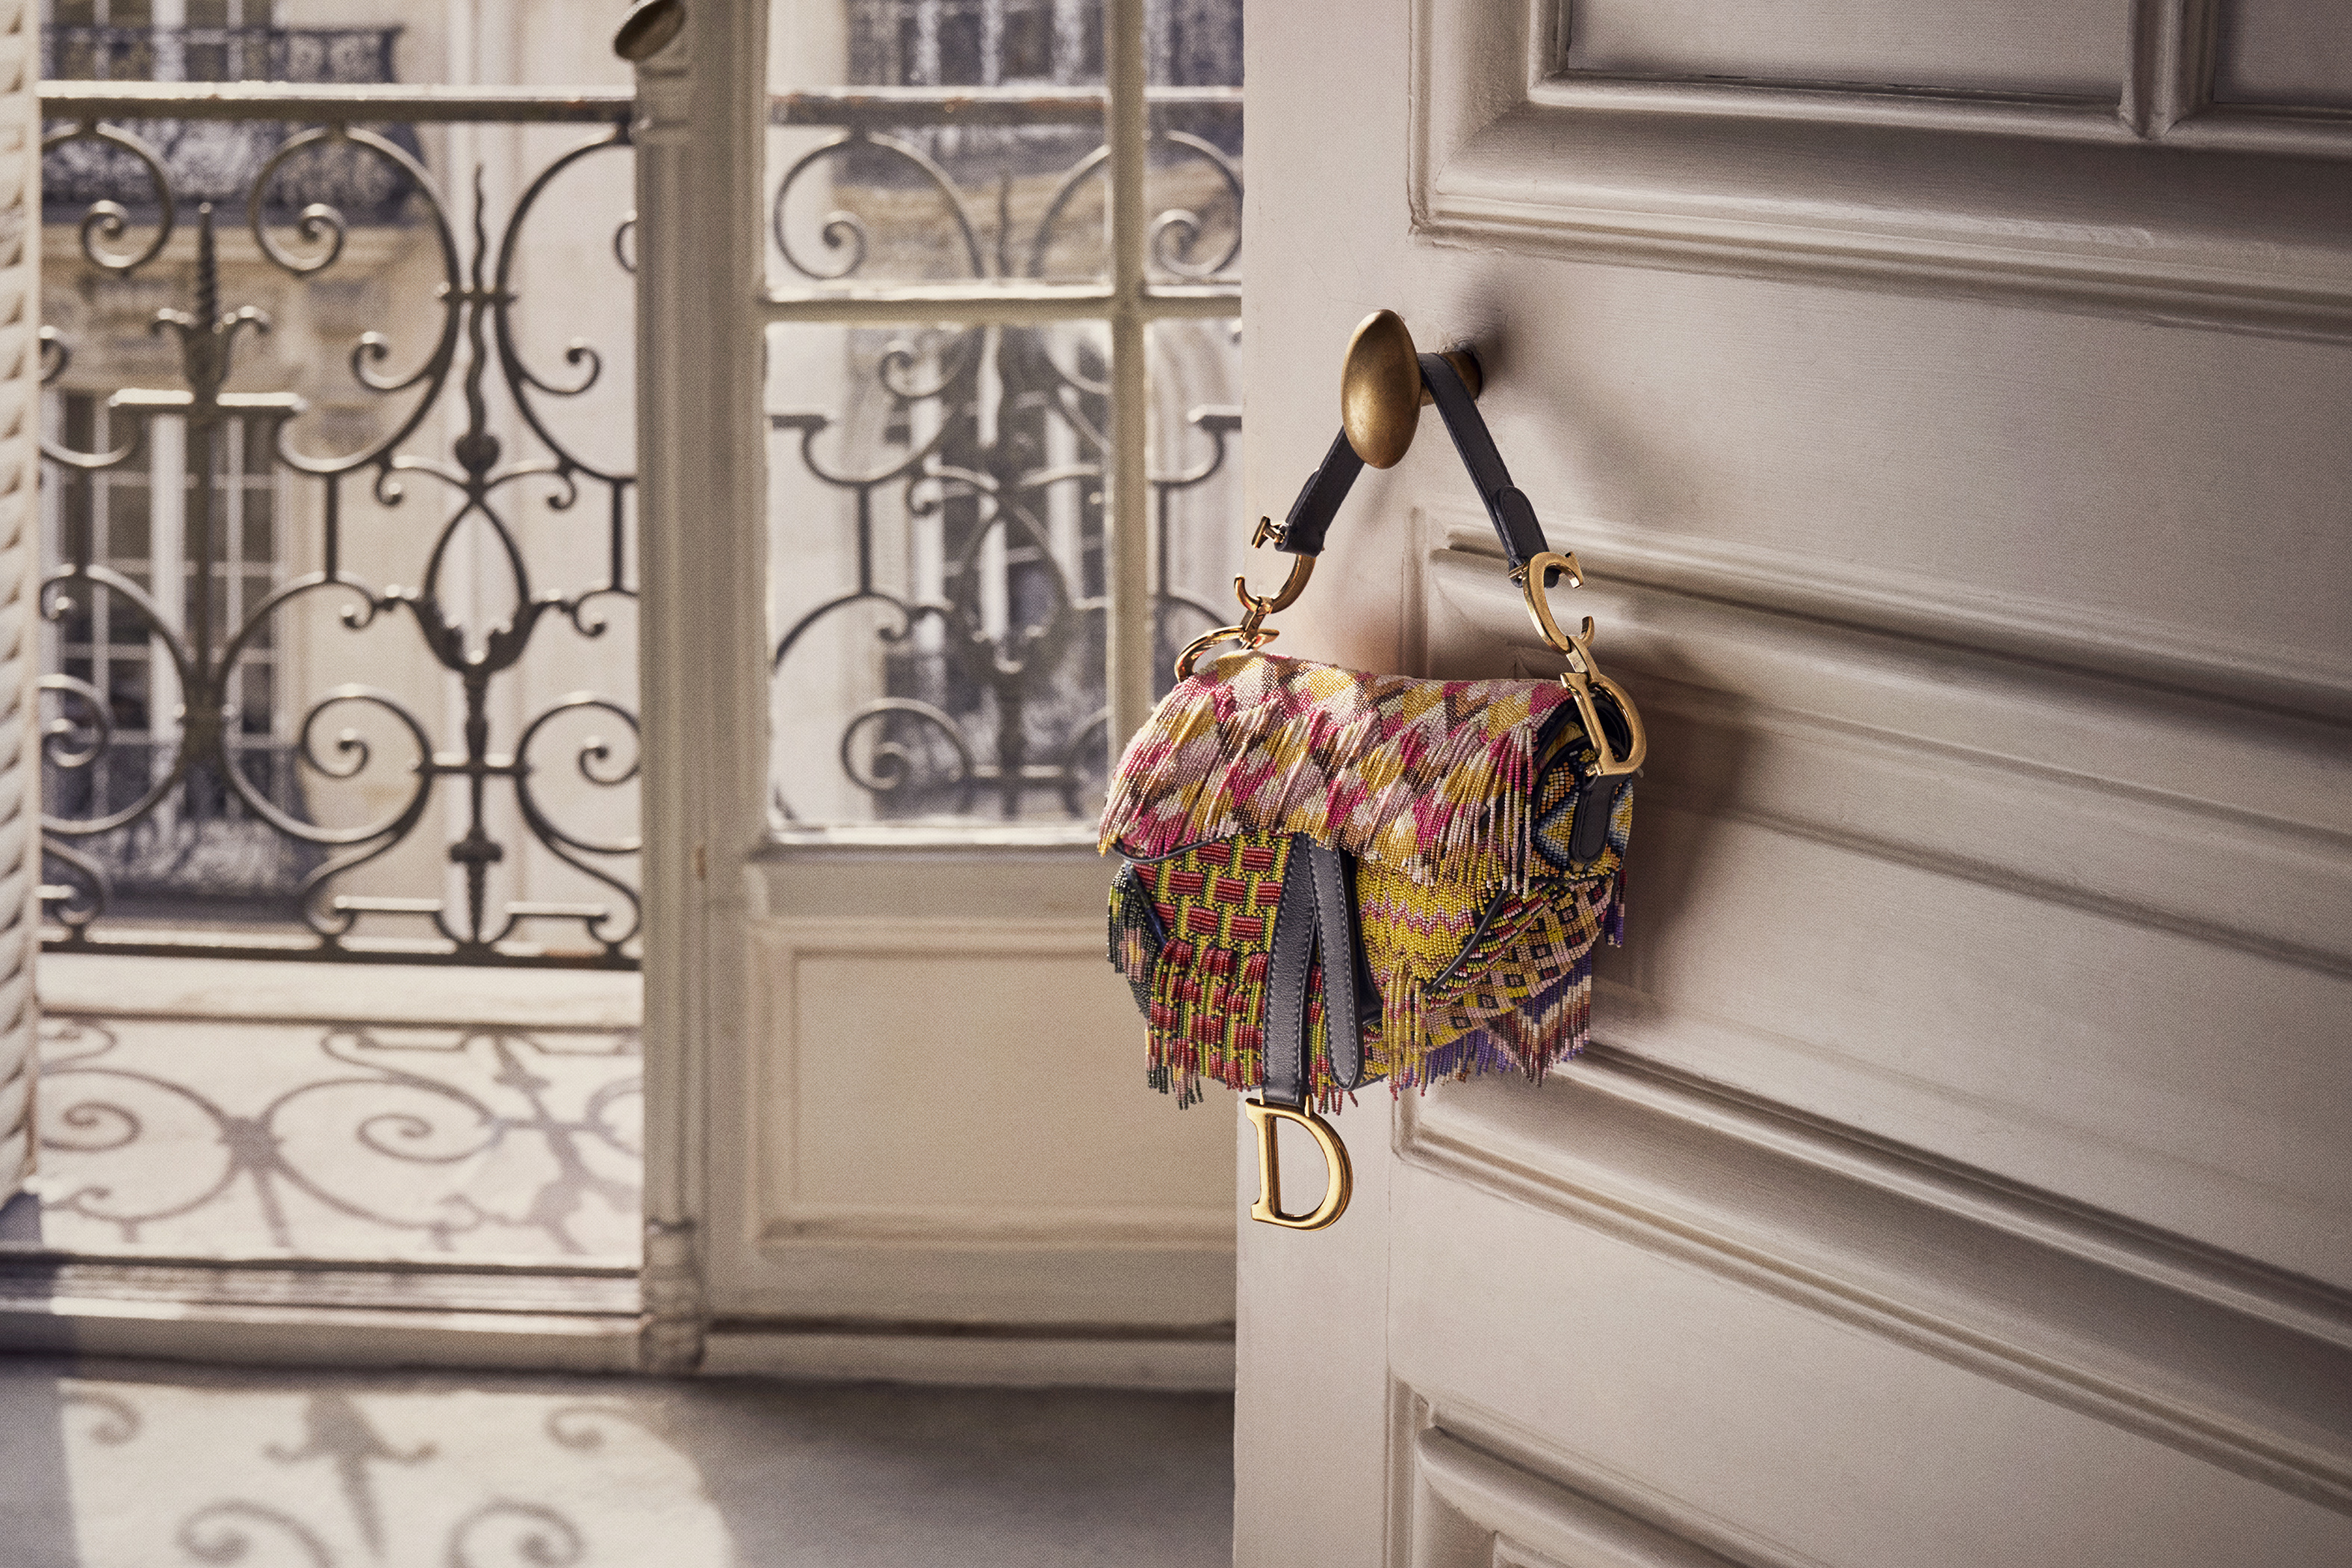 The History Of How Dior's Lady Dior Handbag Became An Icon - MOJEH